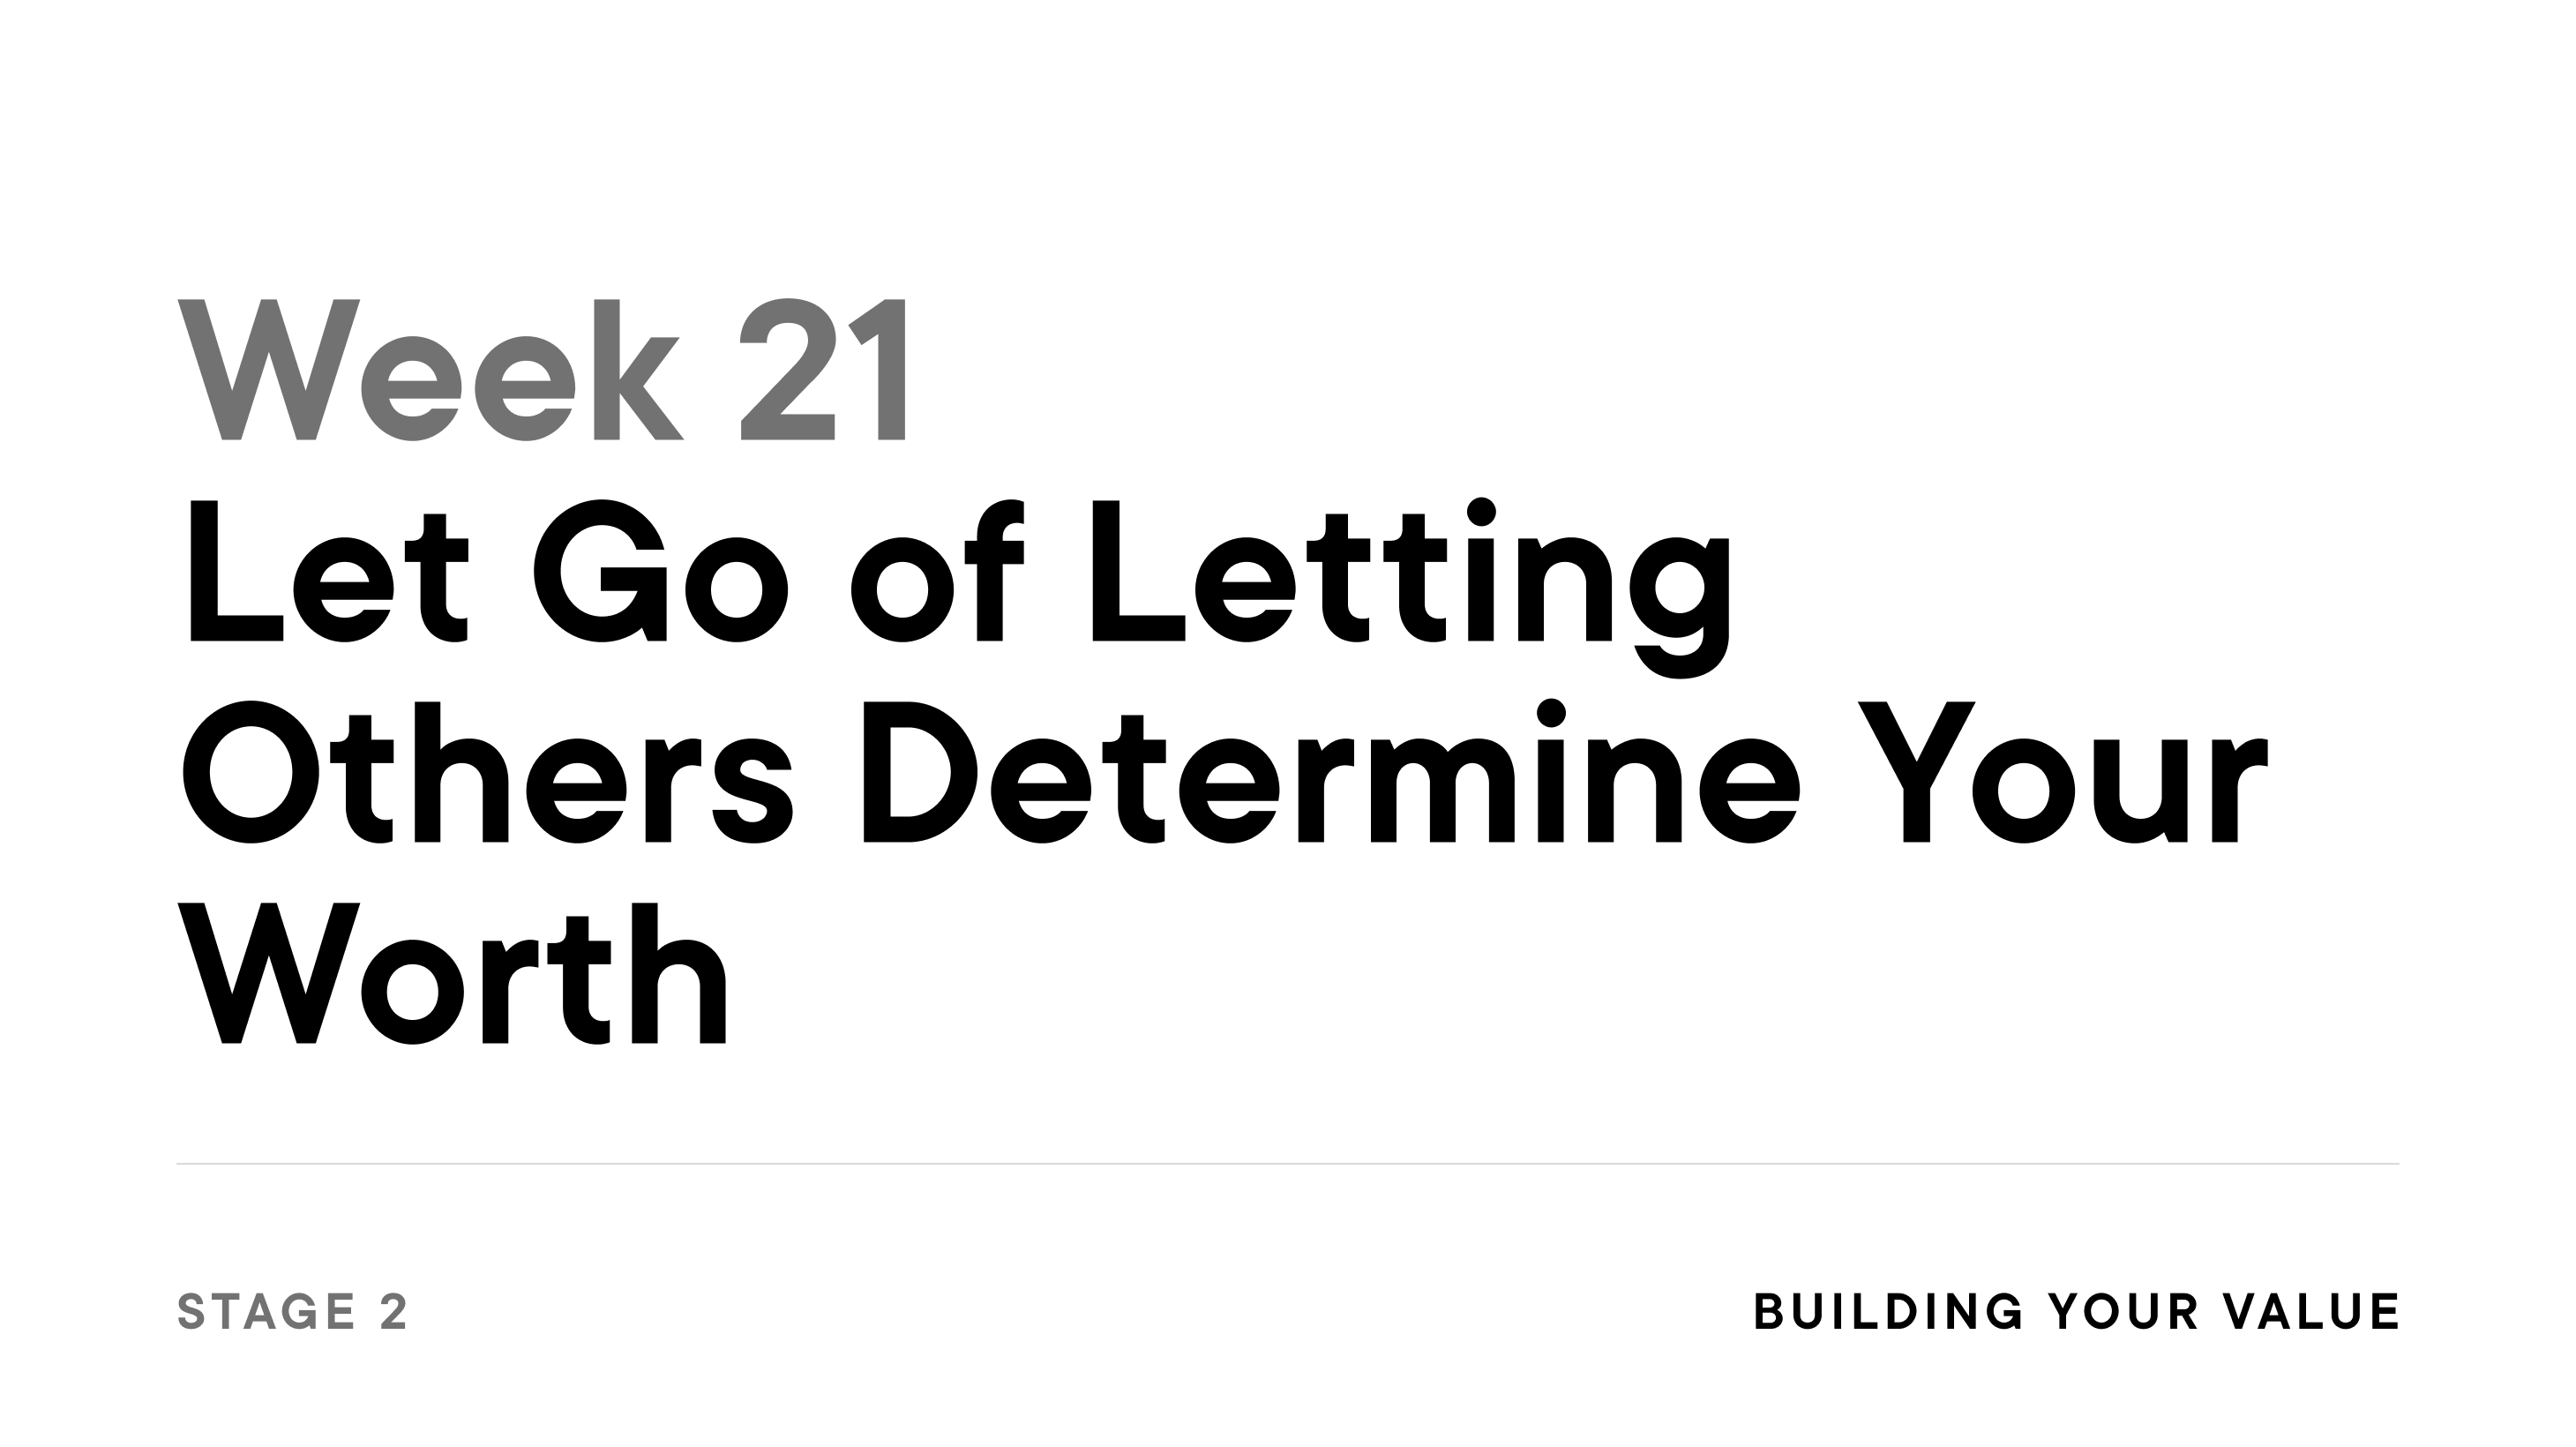 Week 21: Let Go of Letting Others Determine Your Worth